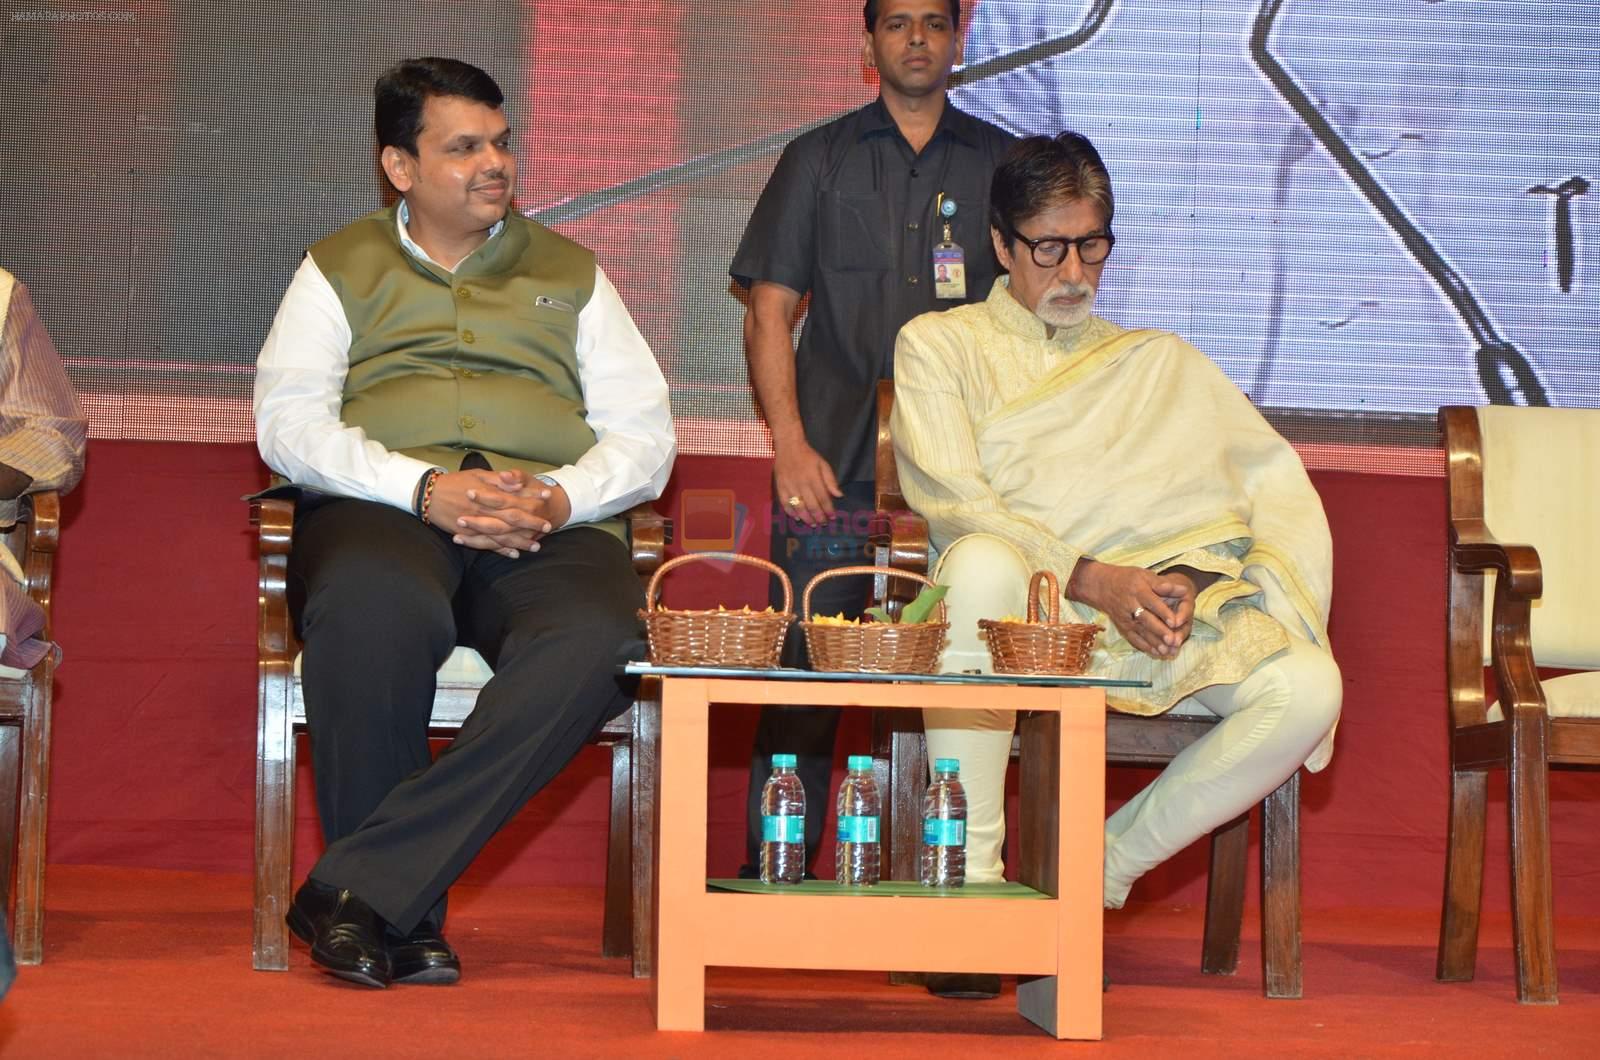 Amitabh Bachchan at a book reading at Marathi event on 16th June 2015